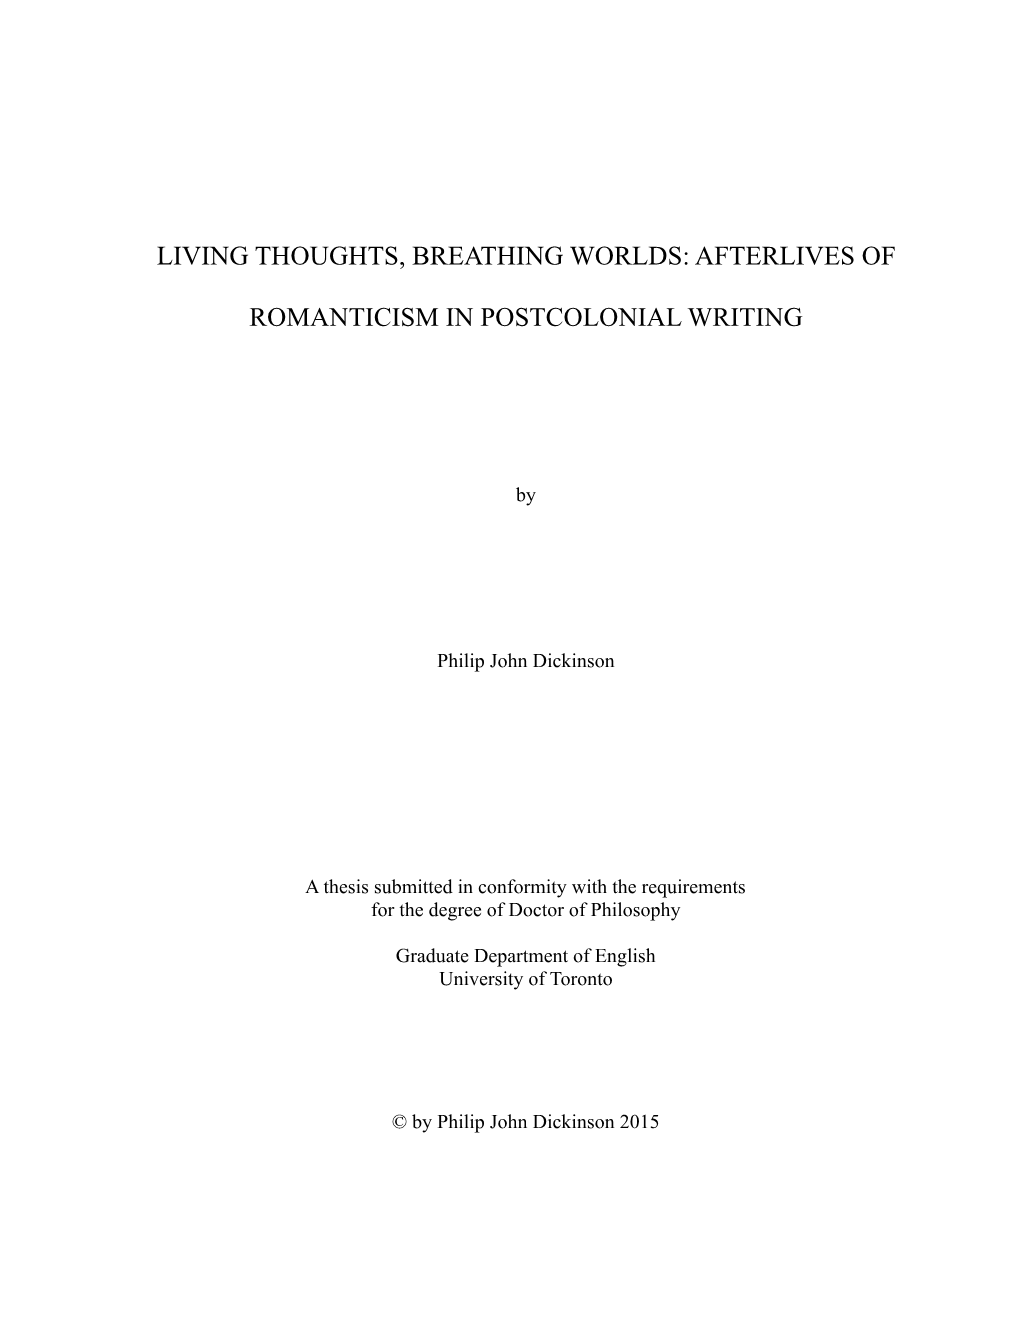 Afterlives of Romanticism in Postcolonial Writing